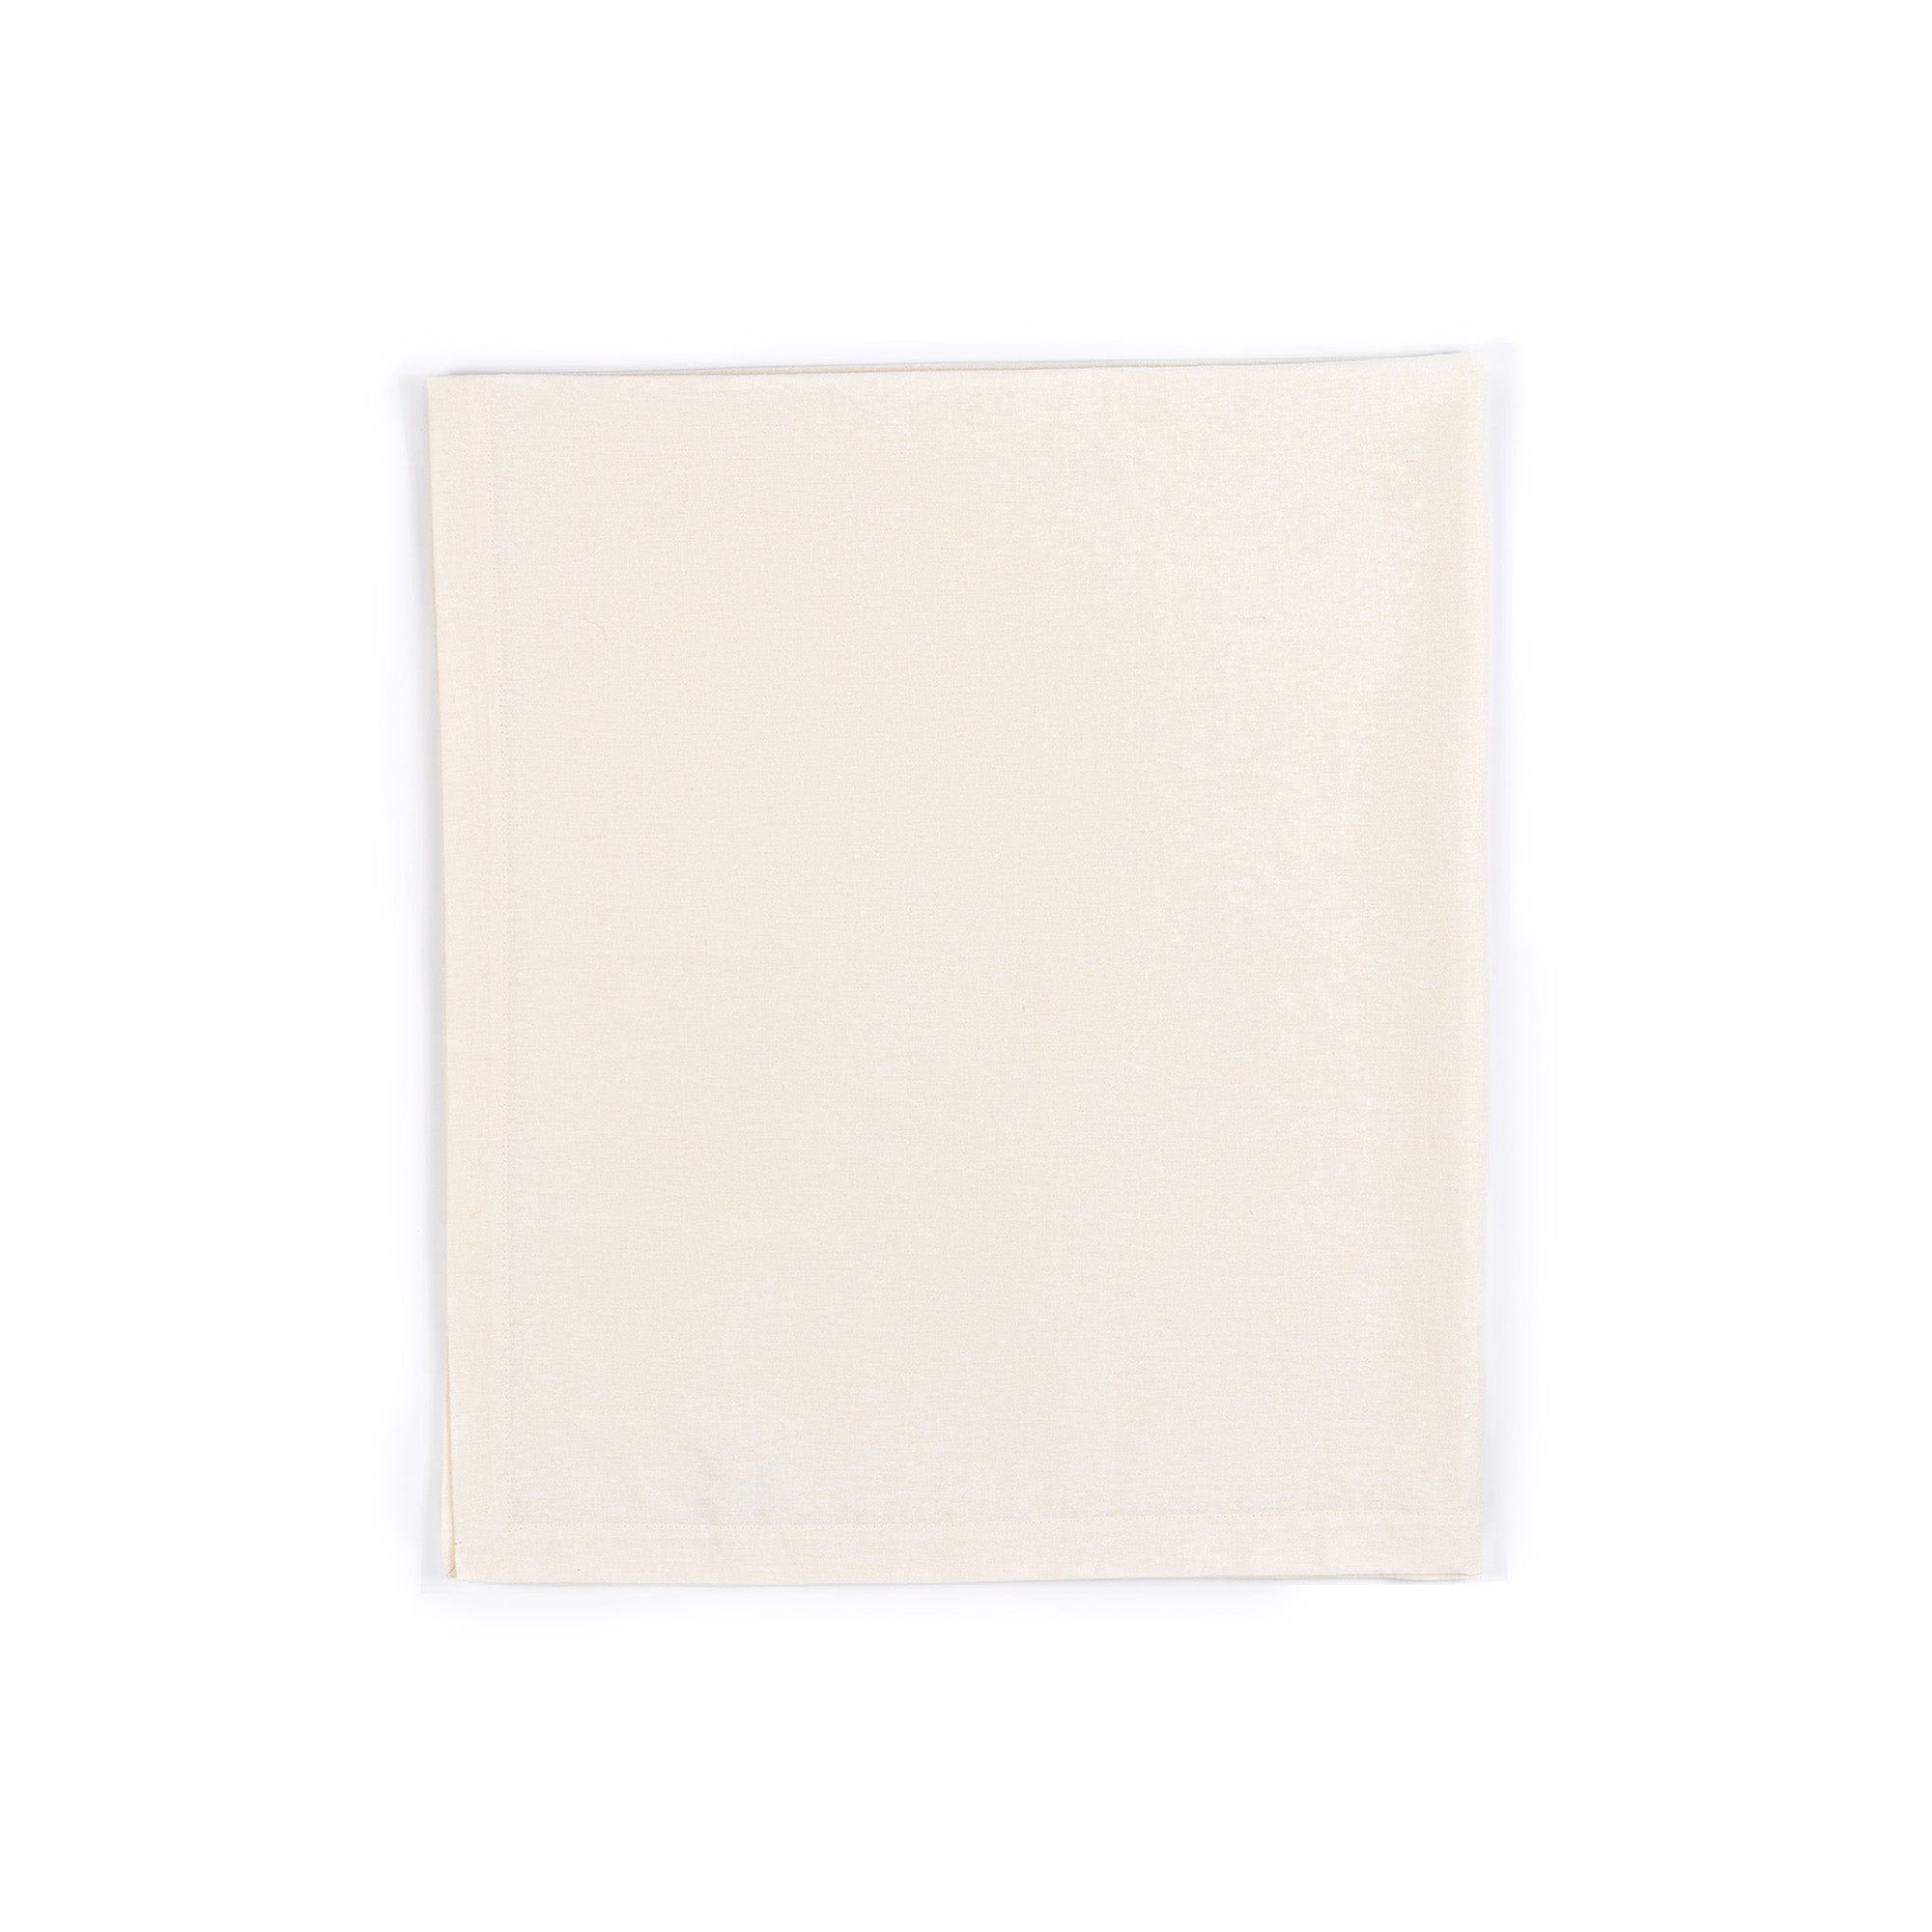 MIlton and Goose cream colored table cloth made to fit on the Crescent table or Round Crescent table.